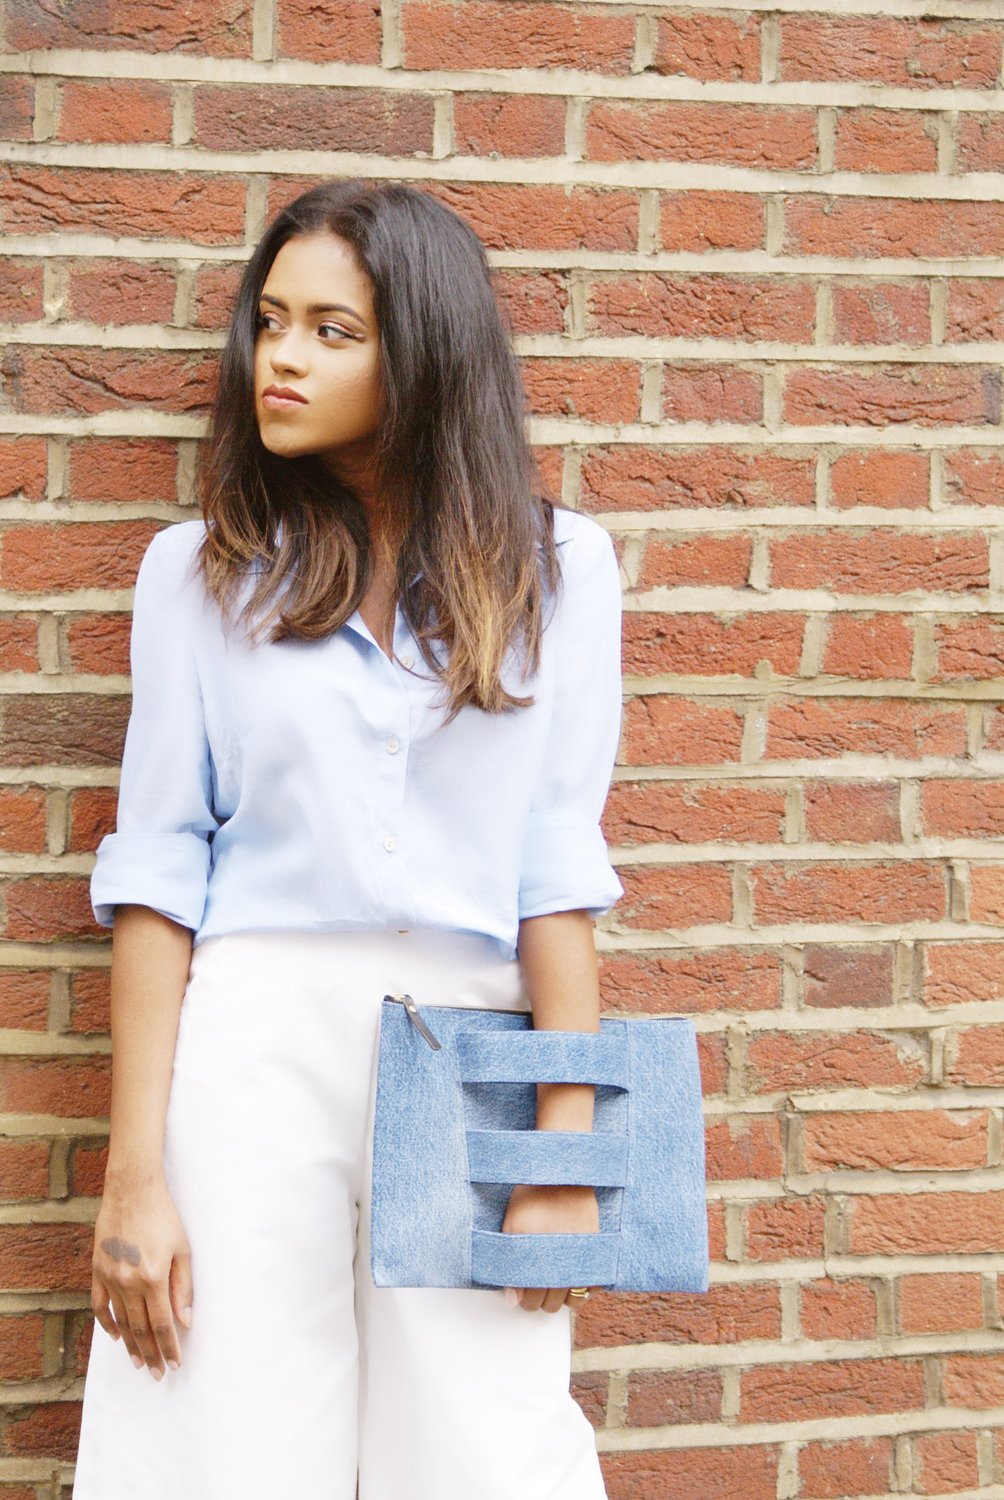 Sachini wearing a blue top and white trousers holding a jean colour Embellished Truth bag